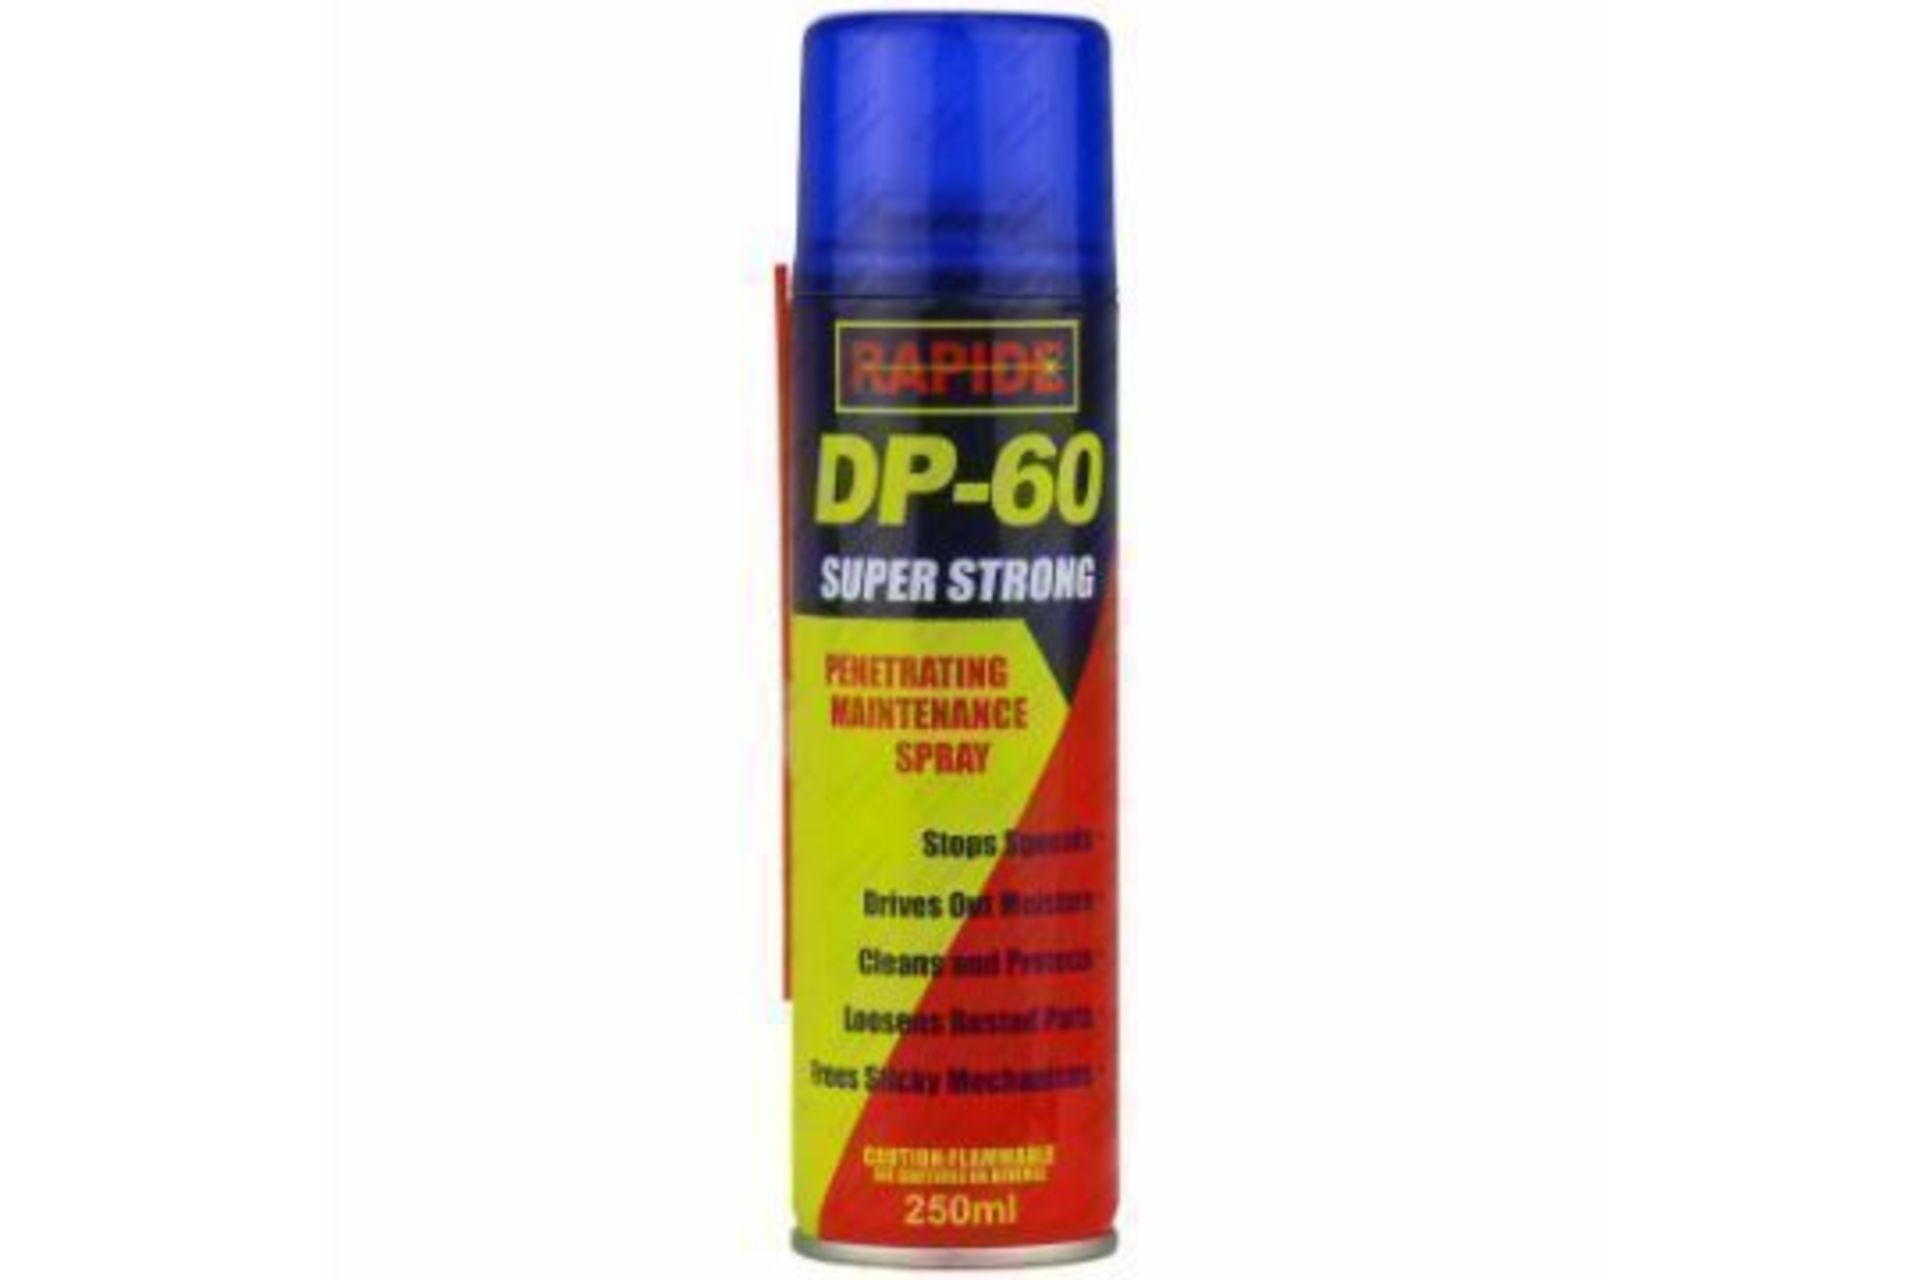 X2 Cans New 250ml Cans DP-60 Maintenance Sprays (similar to wd-40)